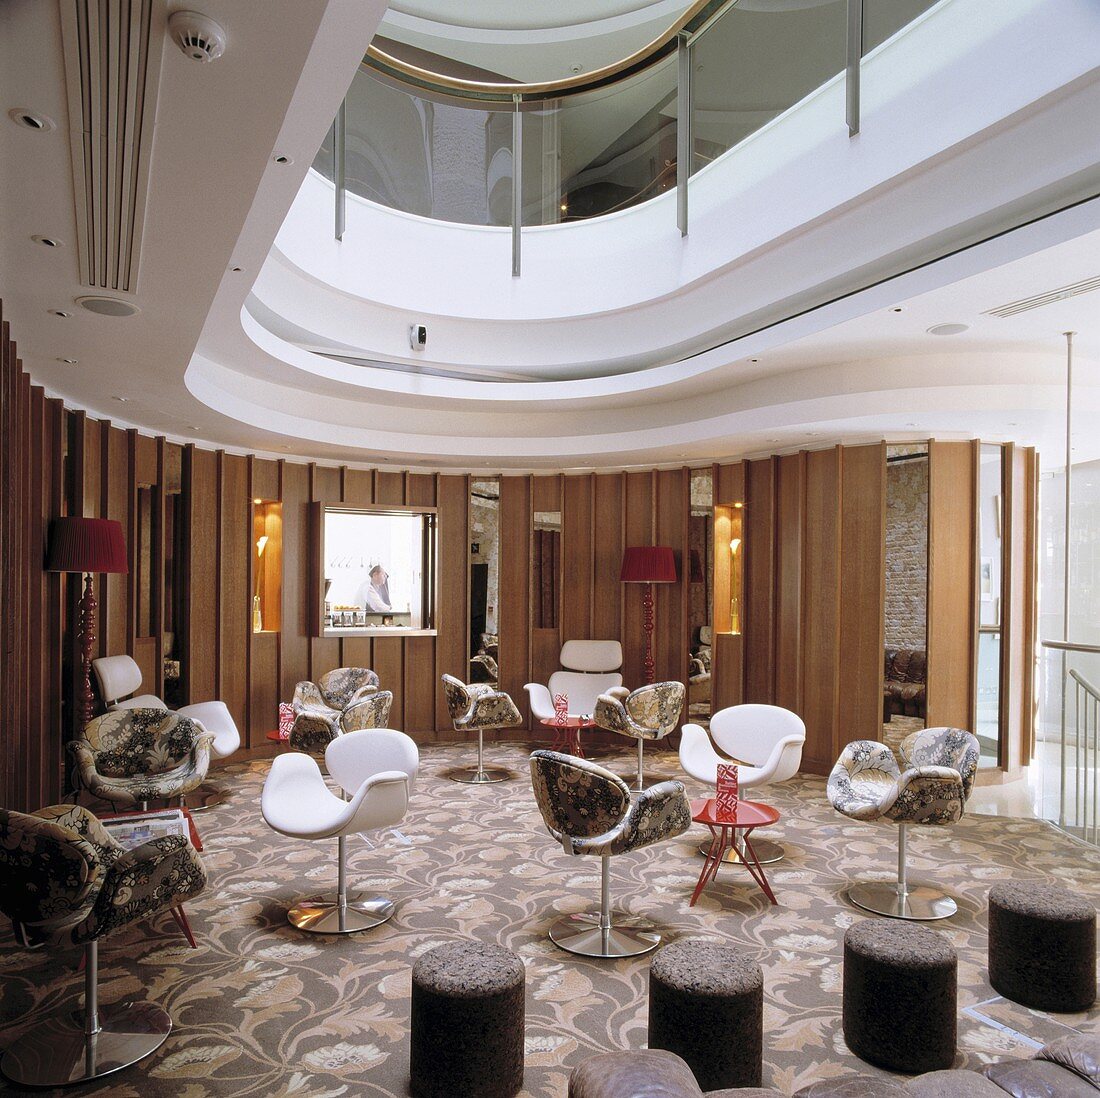 A hotel lobby on a landing with designer chairs and bistro tables on a floral patterned carpet